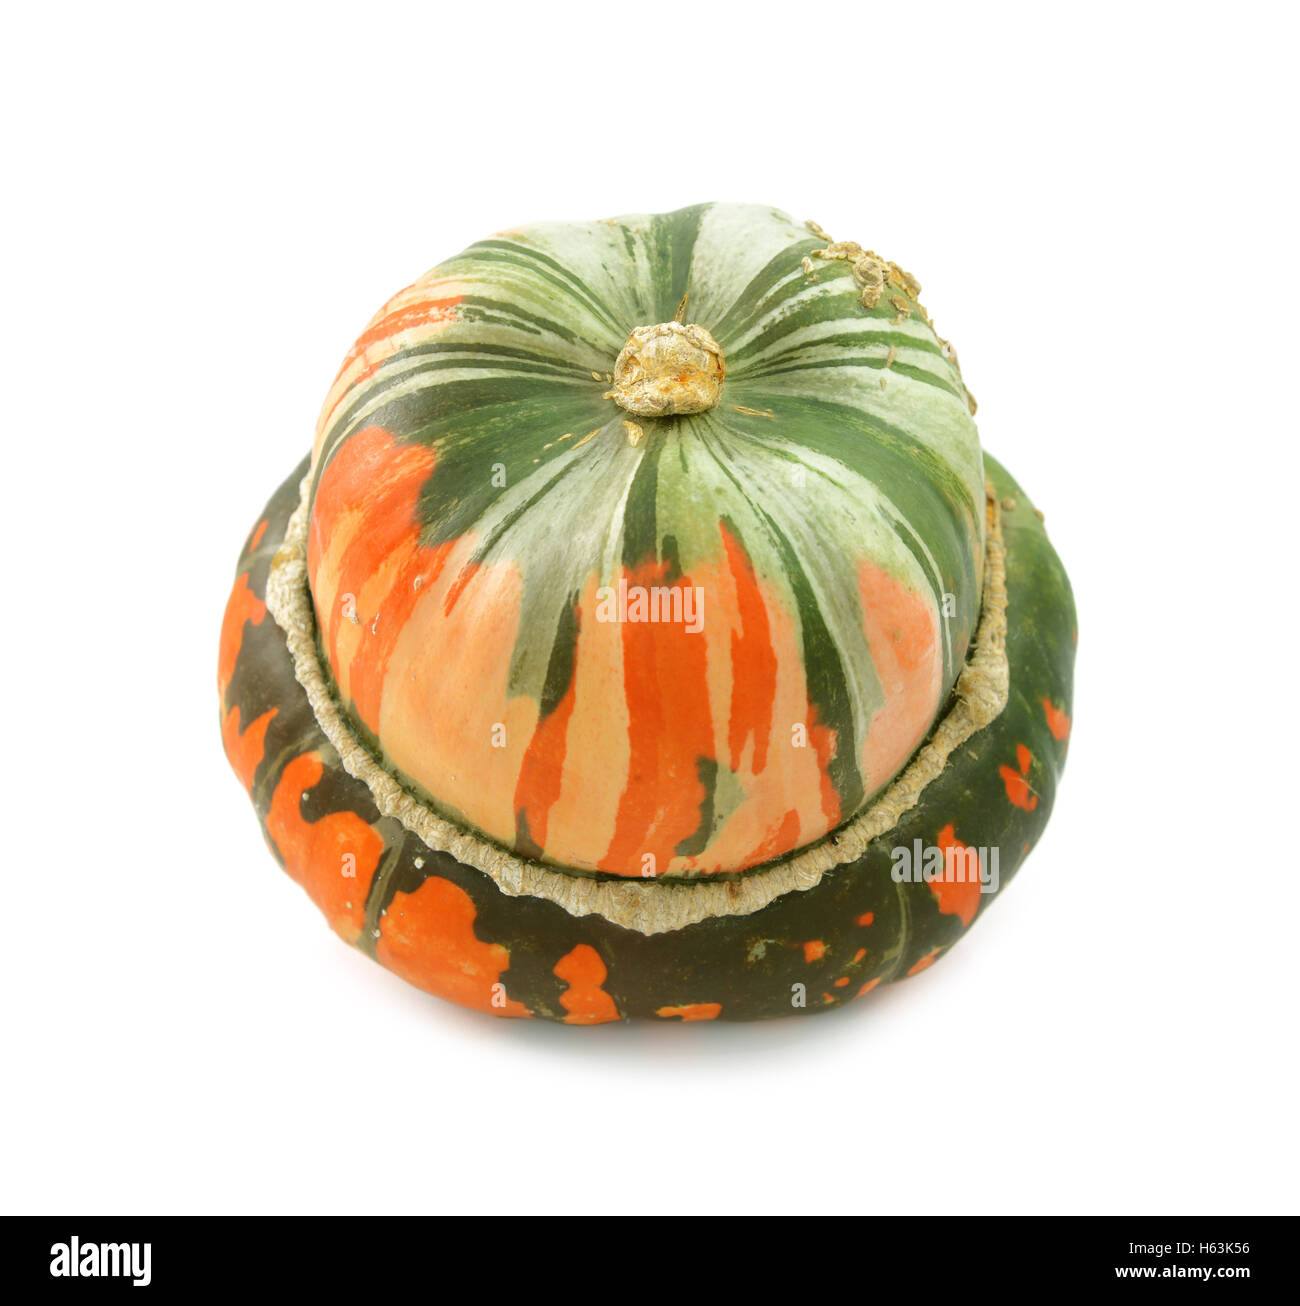 Unusual orange and green striped turban squash, isolated on a white background Stock Photo